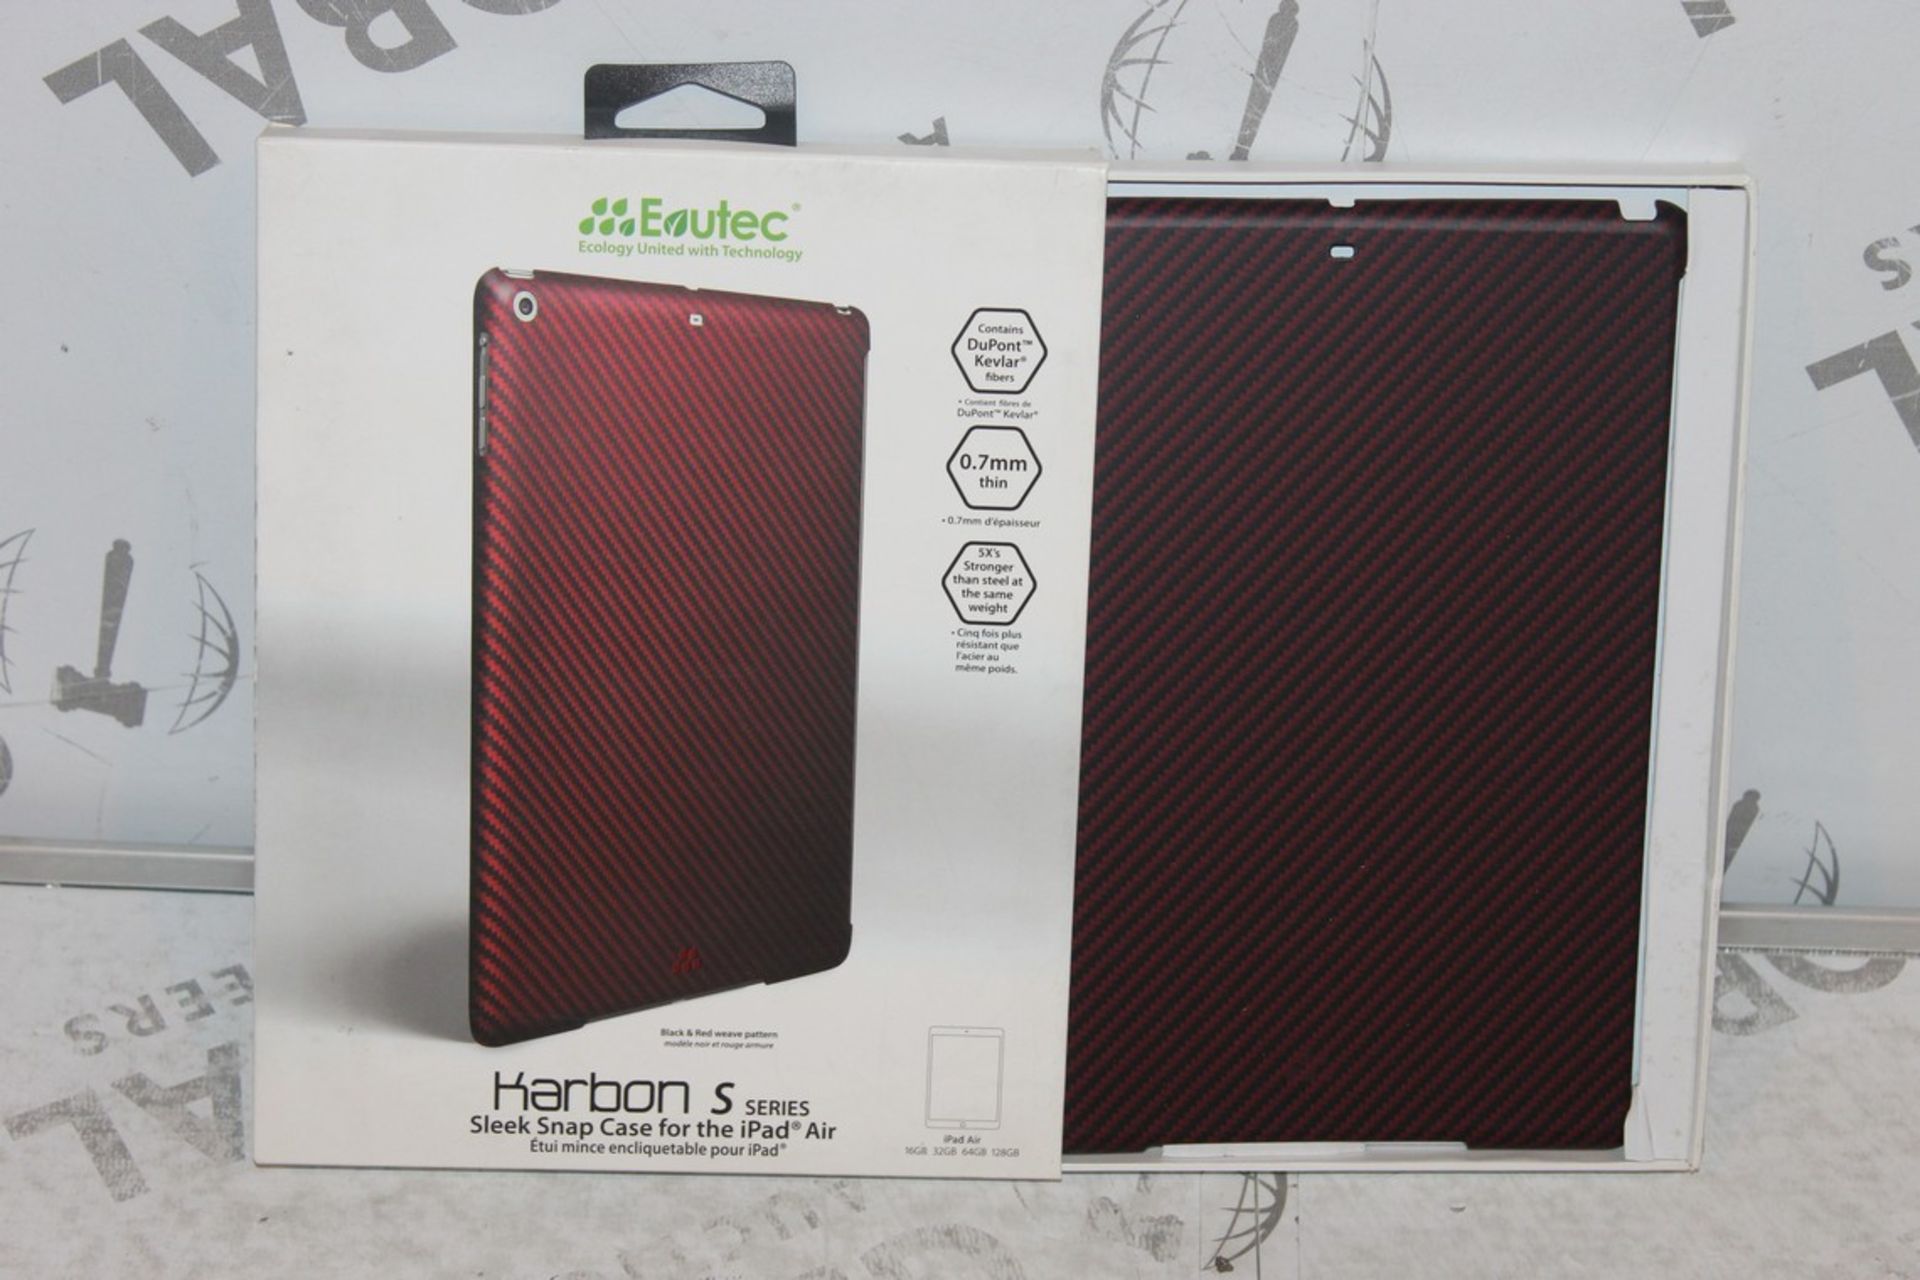 Lot to Contain 2 Boxed, Brand-new, EVUTEC Carbon s, Sleek Snap On Cases For iPad Air, RRP£110.00